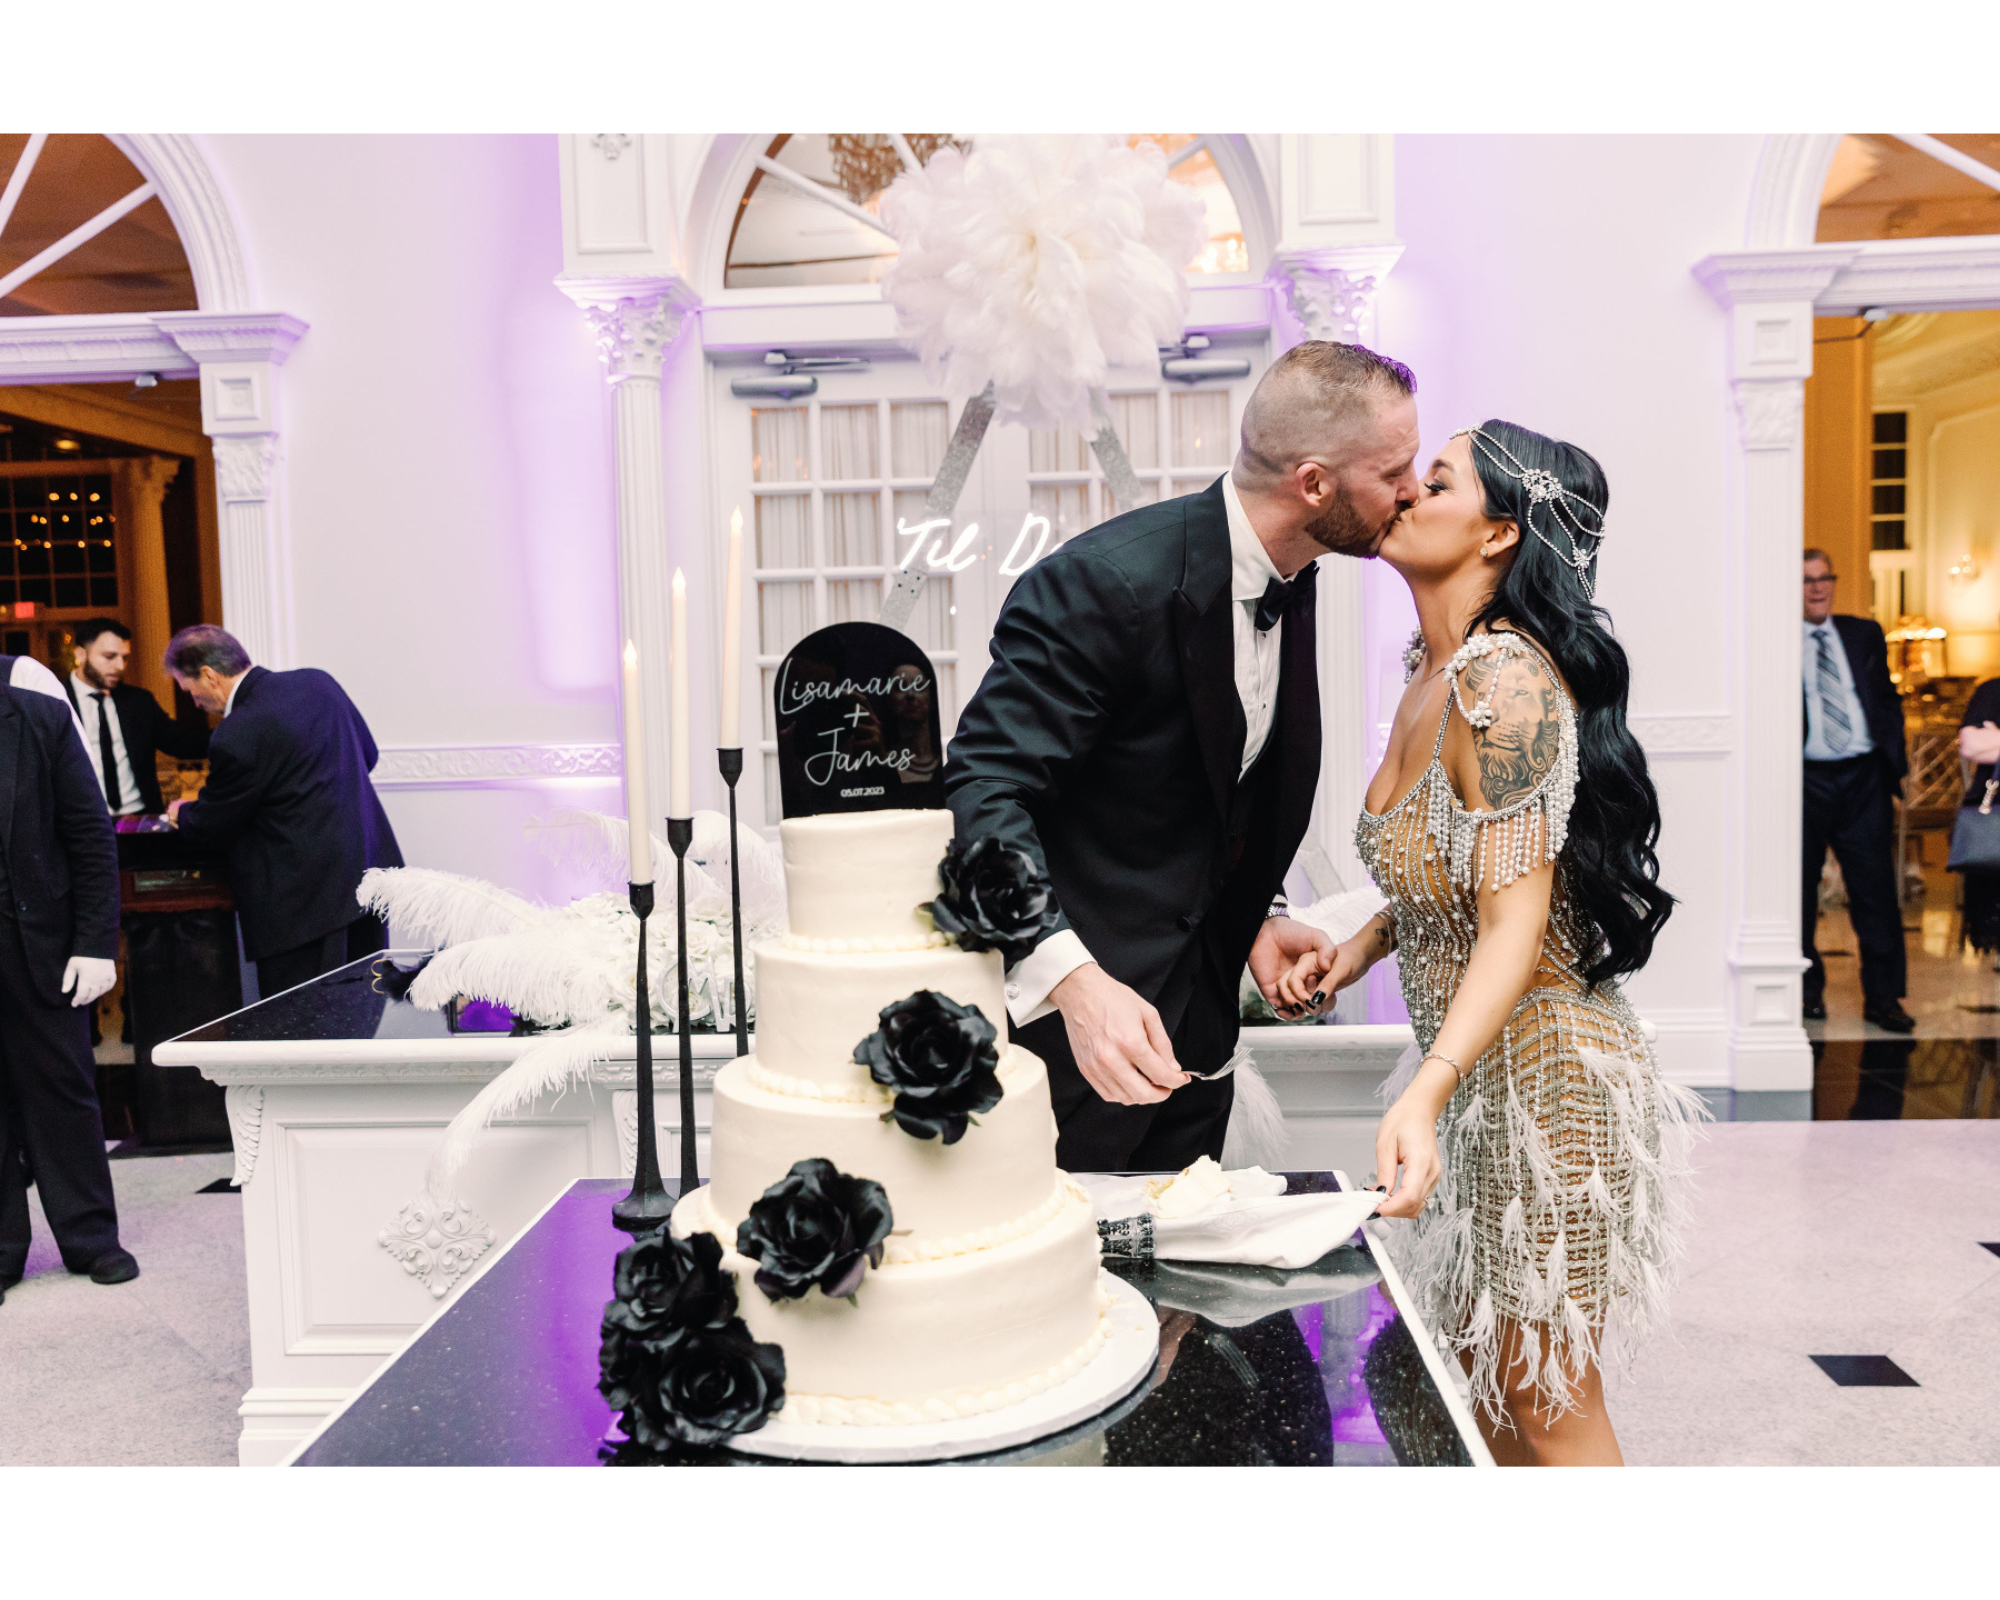 Great Gatsby-inspired bride cutting her black and white cake with her handsome groom. She's wearing a Swarovski-crystal bridal halo headpiece and beaded gown.